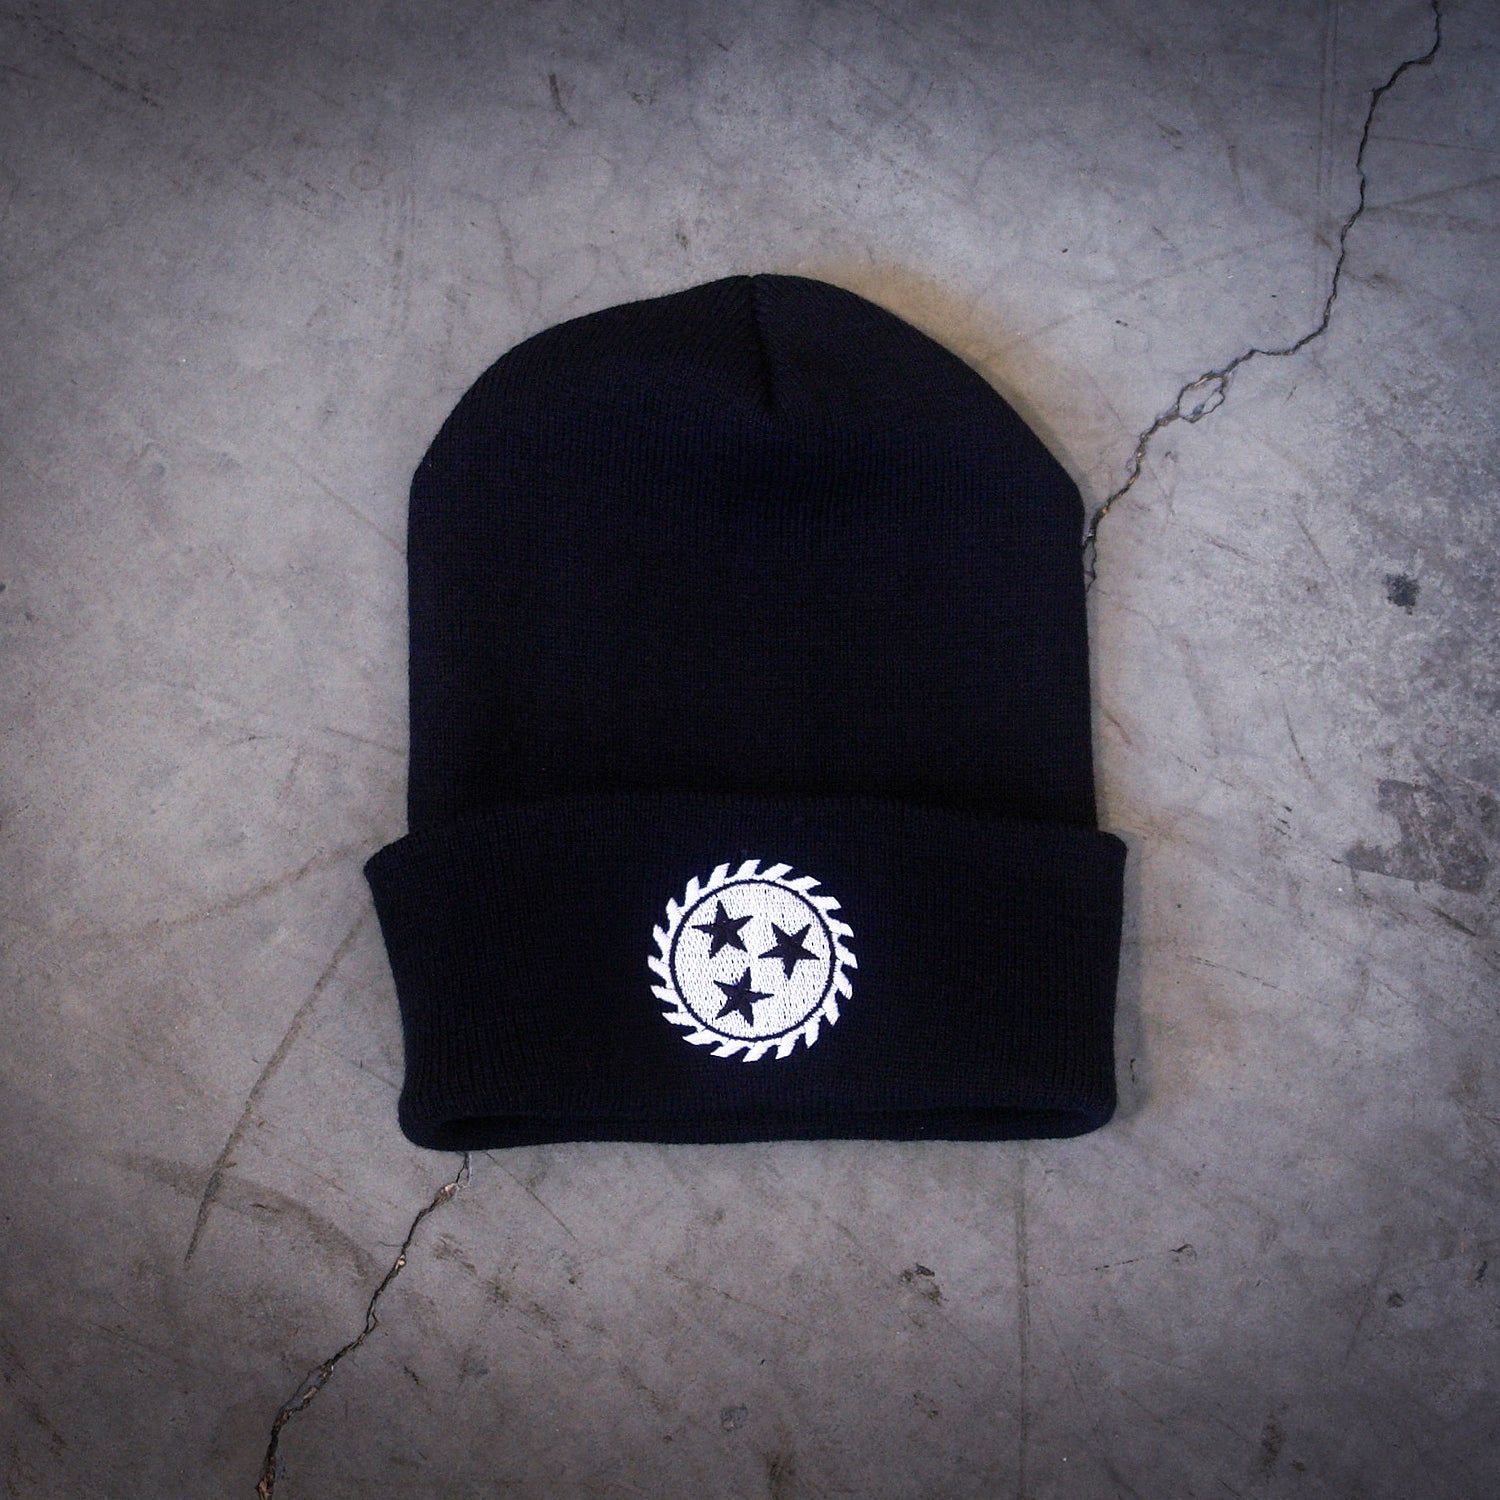 image of a black winter beanie laid pn a concrete floor. beanie has white embroidery on the front center cuff of a sawblade with three stars